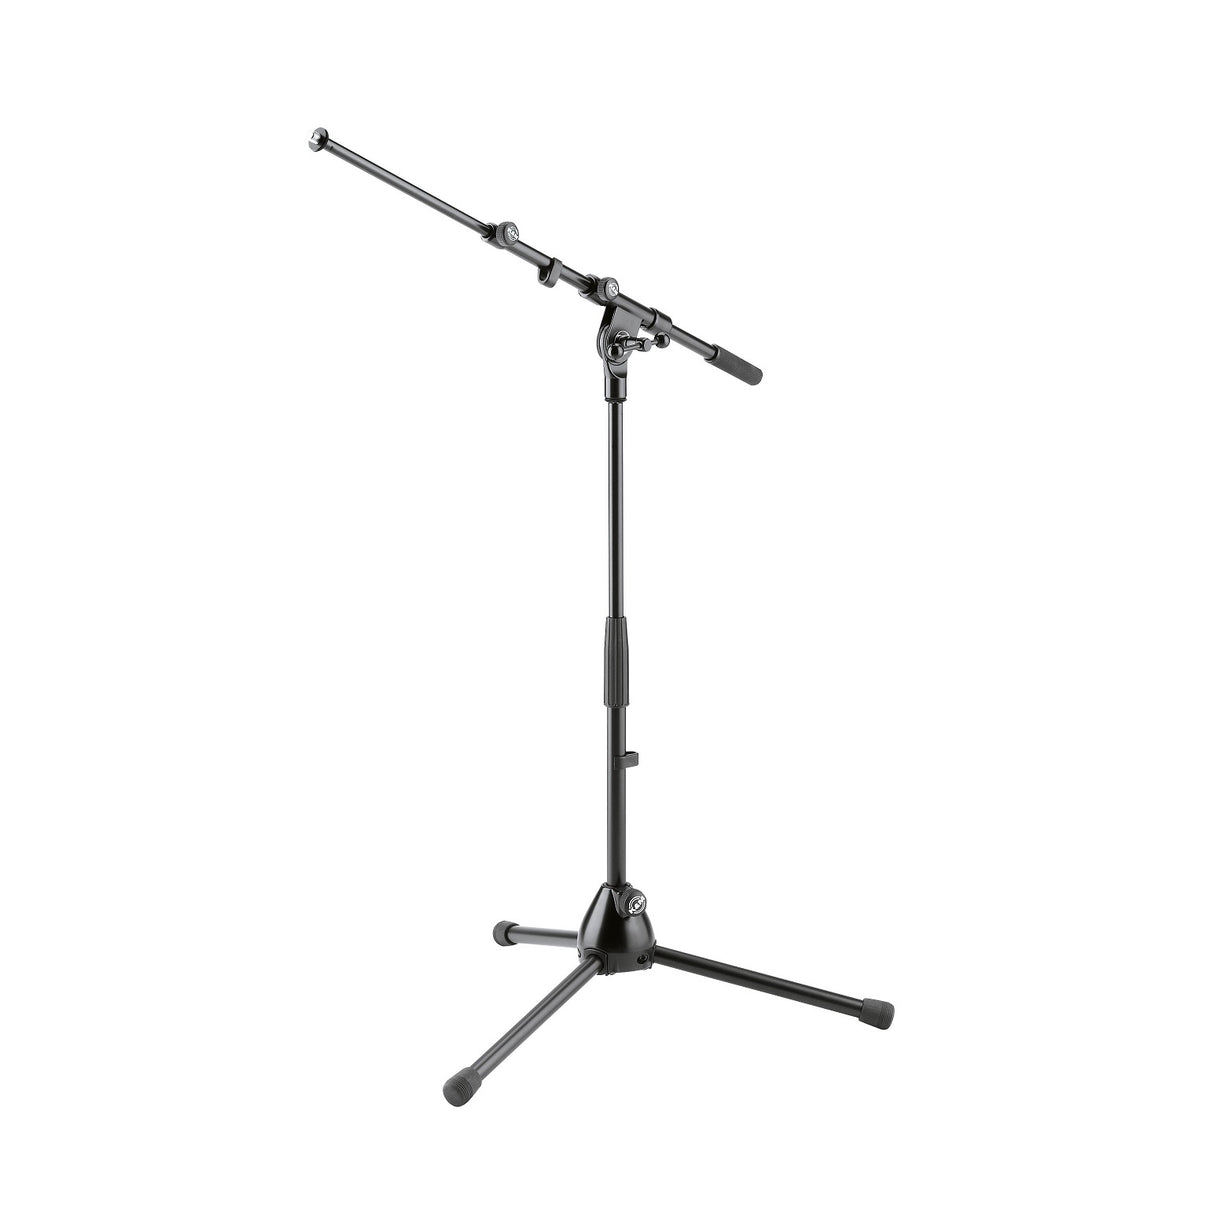 K&M 259 Microphone Stand